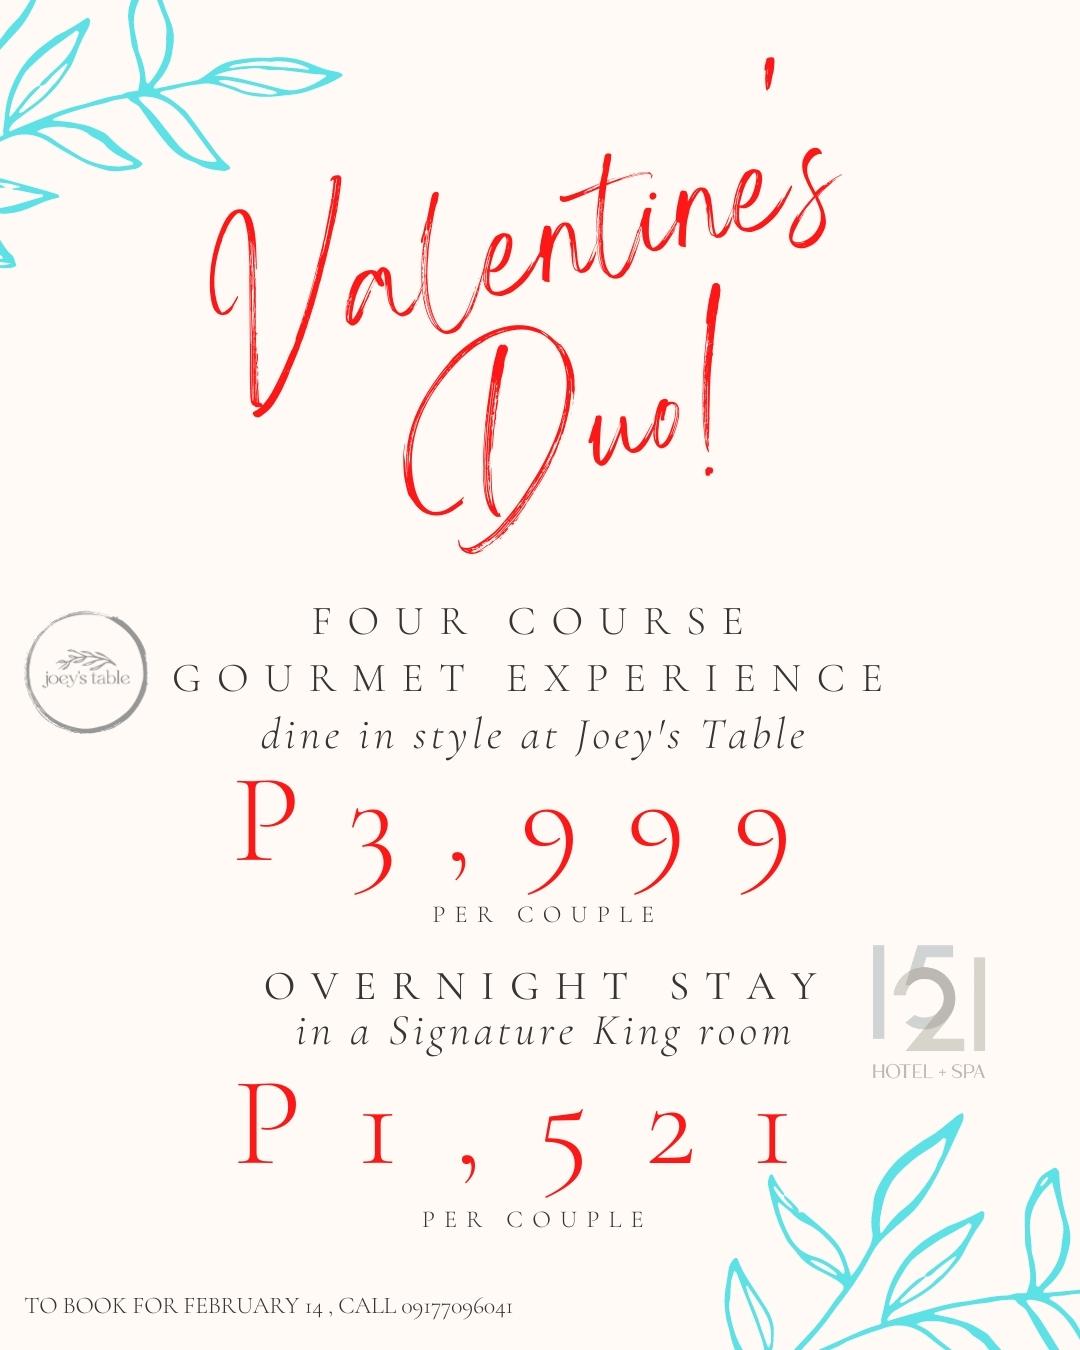 4-COURSE DINNER + OVERNIGHT STAY VALENTINE'S DUO!